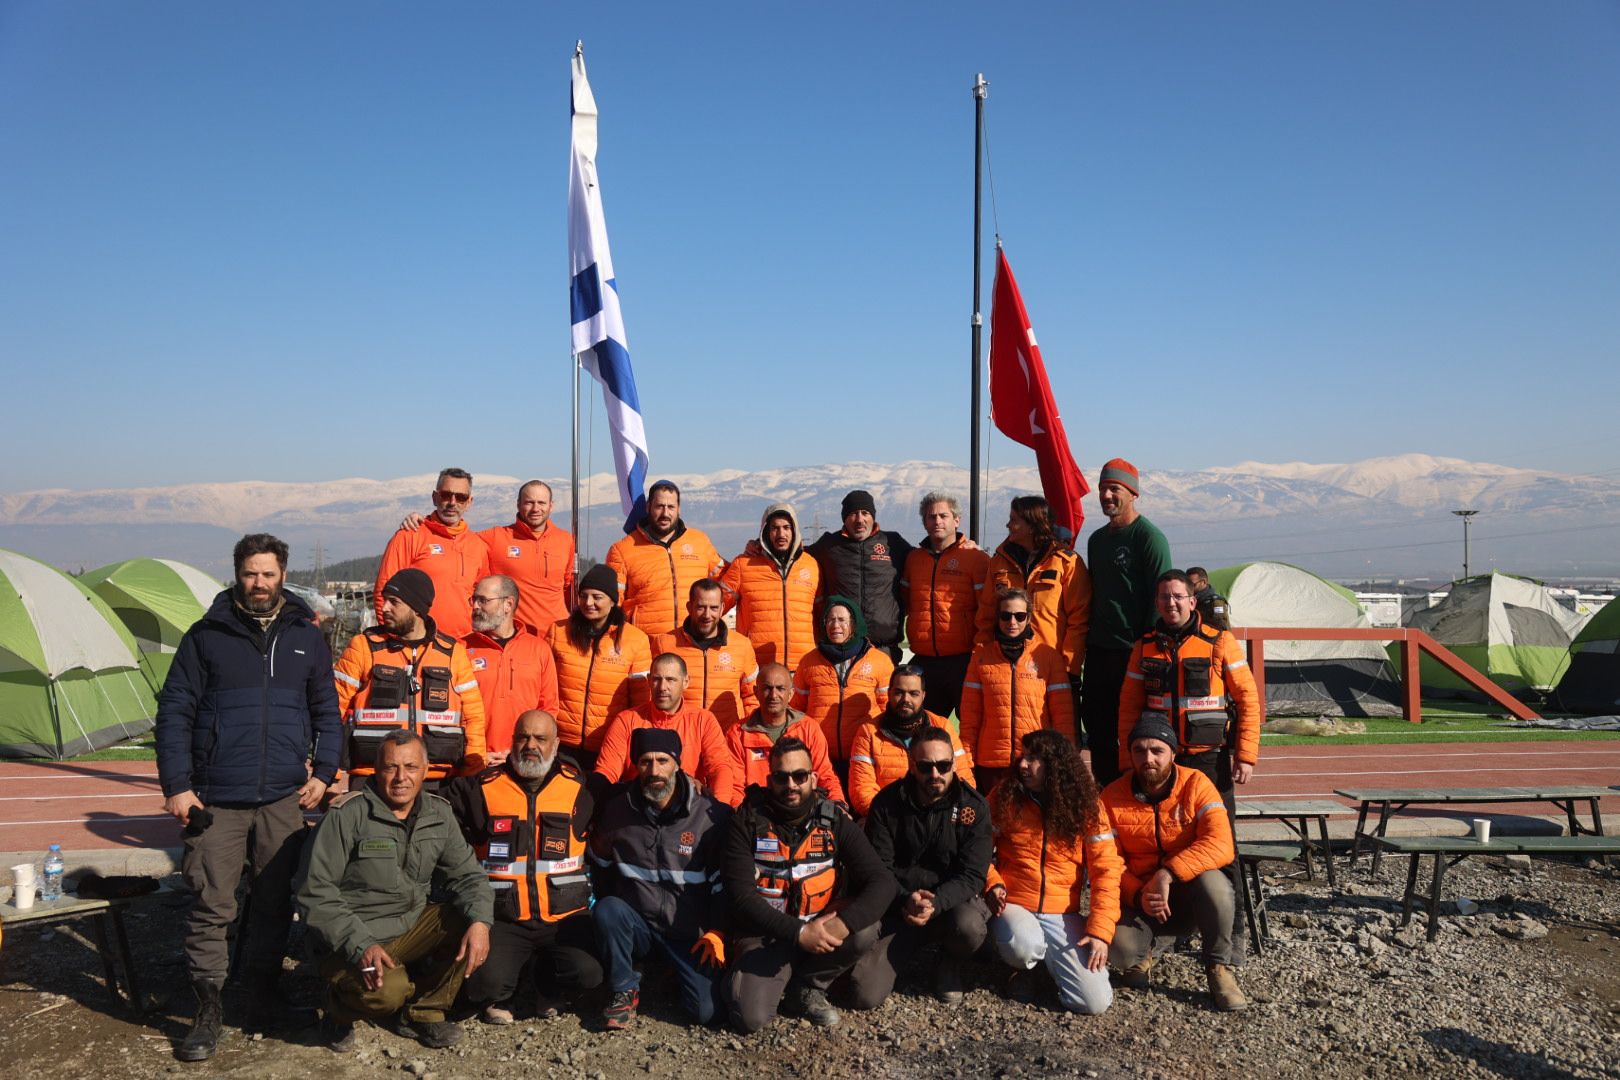 United Hatzalah’s rescue team in Turkey just before departing, citing concerns about a threat against them. (Courtesy United Hatzalah)